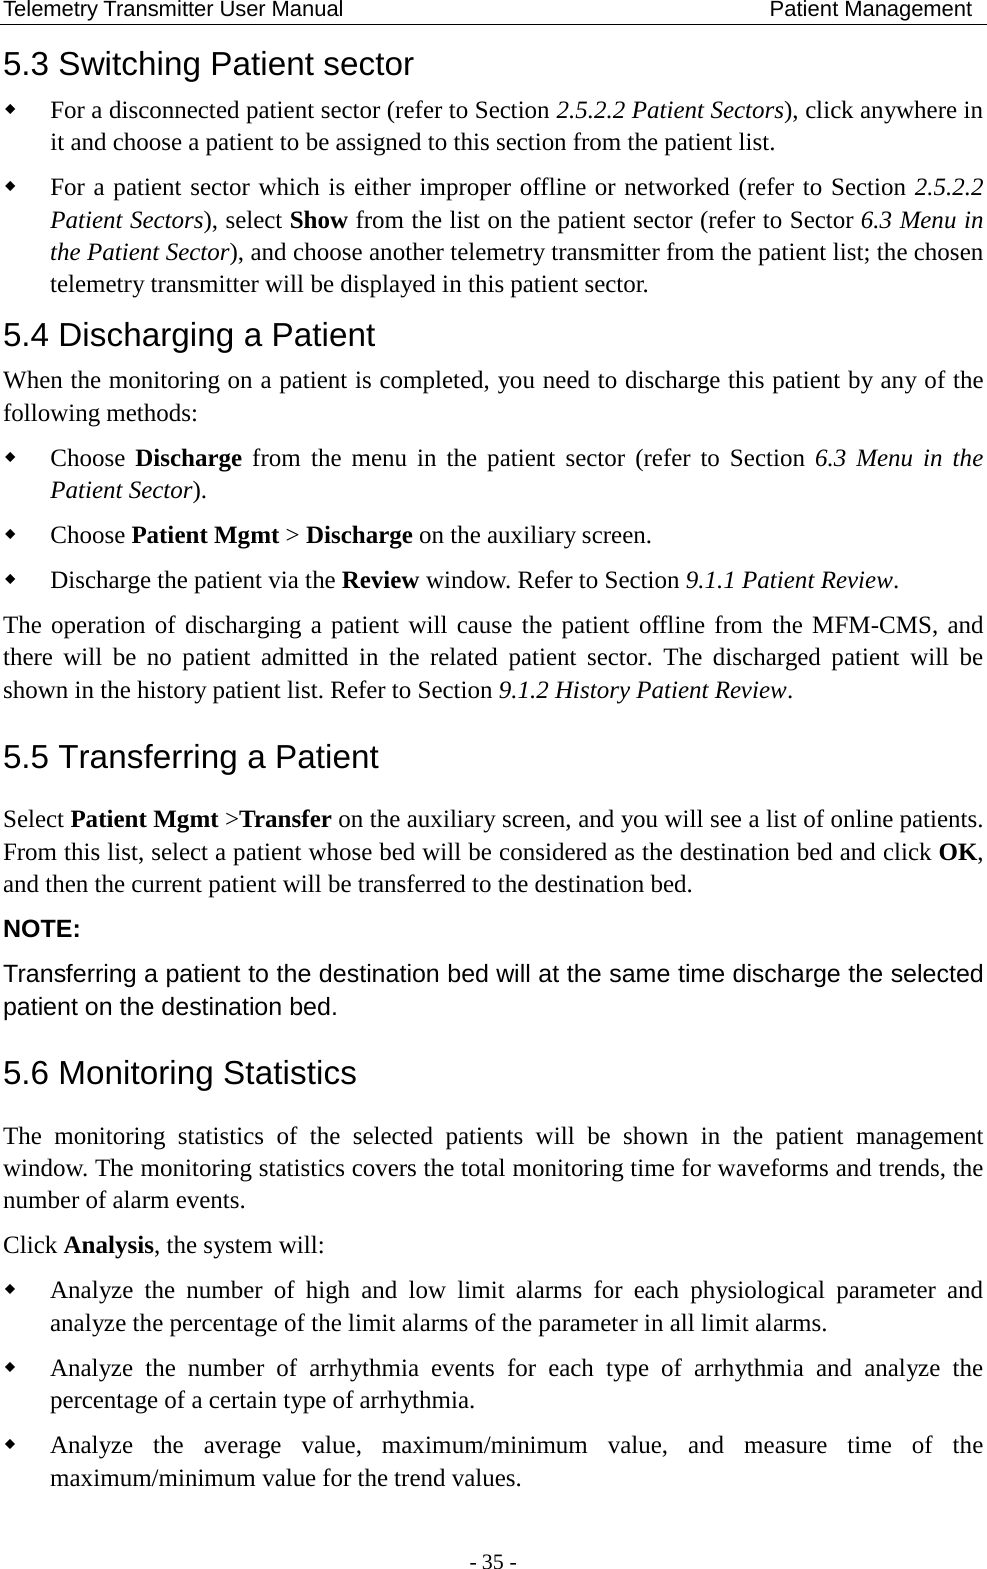 Telemetry Transmitter User Manual                                       Patient Management 5.3 Switching Patient sector  For a disconnected patient sector (refer to Section 2.5.2.2 Patient Sectors), click anywhere in it and choose a patient to be assigned to this section from the patient list.  For a patient sector which is either improper offline or networked (refer to Section 2.5.2.2 Patient Sectors), select Show from the list on the patient sector (refer to Sector 6.3 Menu in the Patient Sector), and choose another telemetry transmitter from the patient list; the chosen telemetry transmitter will be displayed in this patient sector. 5.4 Discharging a Patient When the monitoring on a patient is completed, you need to discharge this patient by any of the following methods:  Choose Discharge from the menu in the patient sector (refer to Section 6.3 Menu in the Patient Sector).  Choose Patient Mgmt &gt; Discharge on the auxiliary screen.  Discharge the patient via the Review window. Refer to Section 9.1.1 Patient Review. The operation of discharging a patient will cause the patient offline from the MFM-CMS, and there will be no patient admitted in the related patient sector. The discharged patient will be shown in the history patient list. Refer to Section 9.1.2 History Patient Review. 5.5 Transferring a Patient Select Patient Mgmt &gt;Transfer on the auxiliary screen, and you will see a list of online patients. From this list, select a patient whose bed will be considered as the destination bed and click OK, and then the current patient will be transferred to the destination bed.   NOTE: Transferring a patient to the destination bed will at the same time discharge the selected patient on the destination bed.   5.6 Monitoring Statistics The monitoring statistics of the selected patients will be shown in the patient management window. The monitoring statistics covers the total monitoring time for waveforms and trends, the number of alarm events.   Click Analysis, the system will:  Analyze the number of high and low limit alarms for each physiological parameter and analyze the percentage of the limit alarms of the parameter in all limit alarms.  Analyze the number of arrhythmia events for each type of arrhythmia and analyze the percentage of a certain type of arrhythmia.  Analyze the average value, maximum/minimum value, and measure time of the maximum/minimum value for the trend values.  - 35 - 